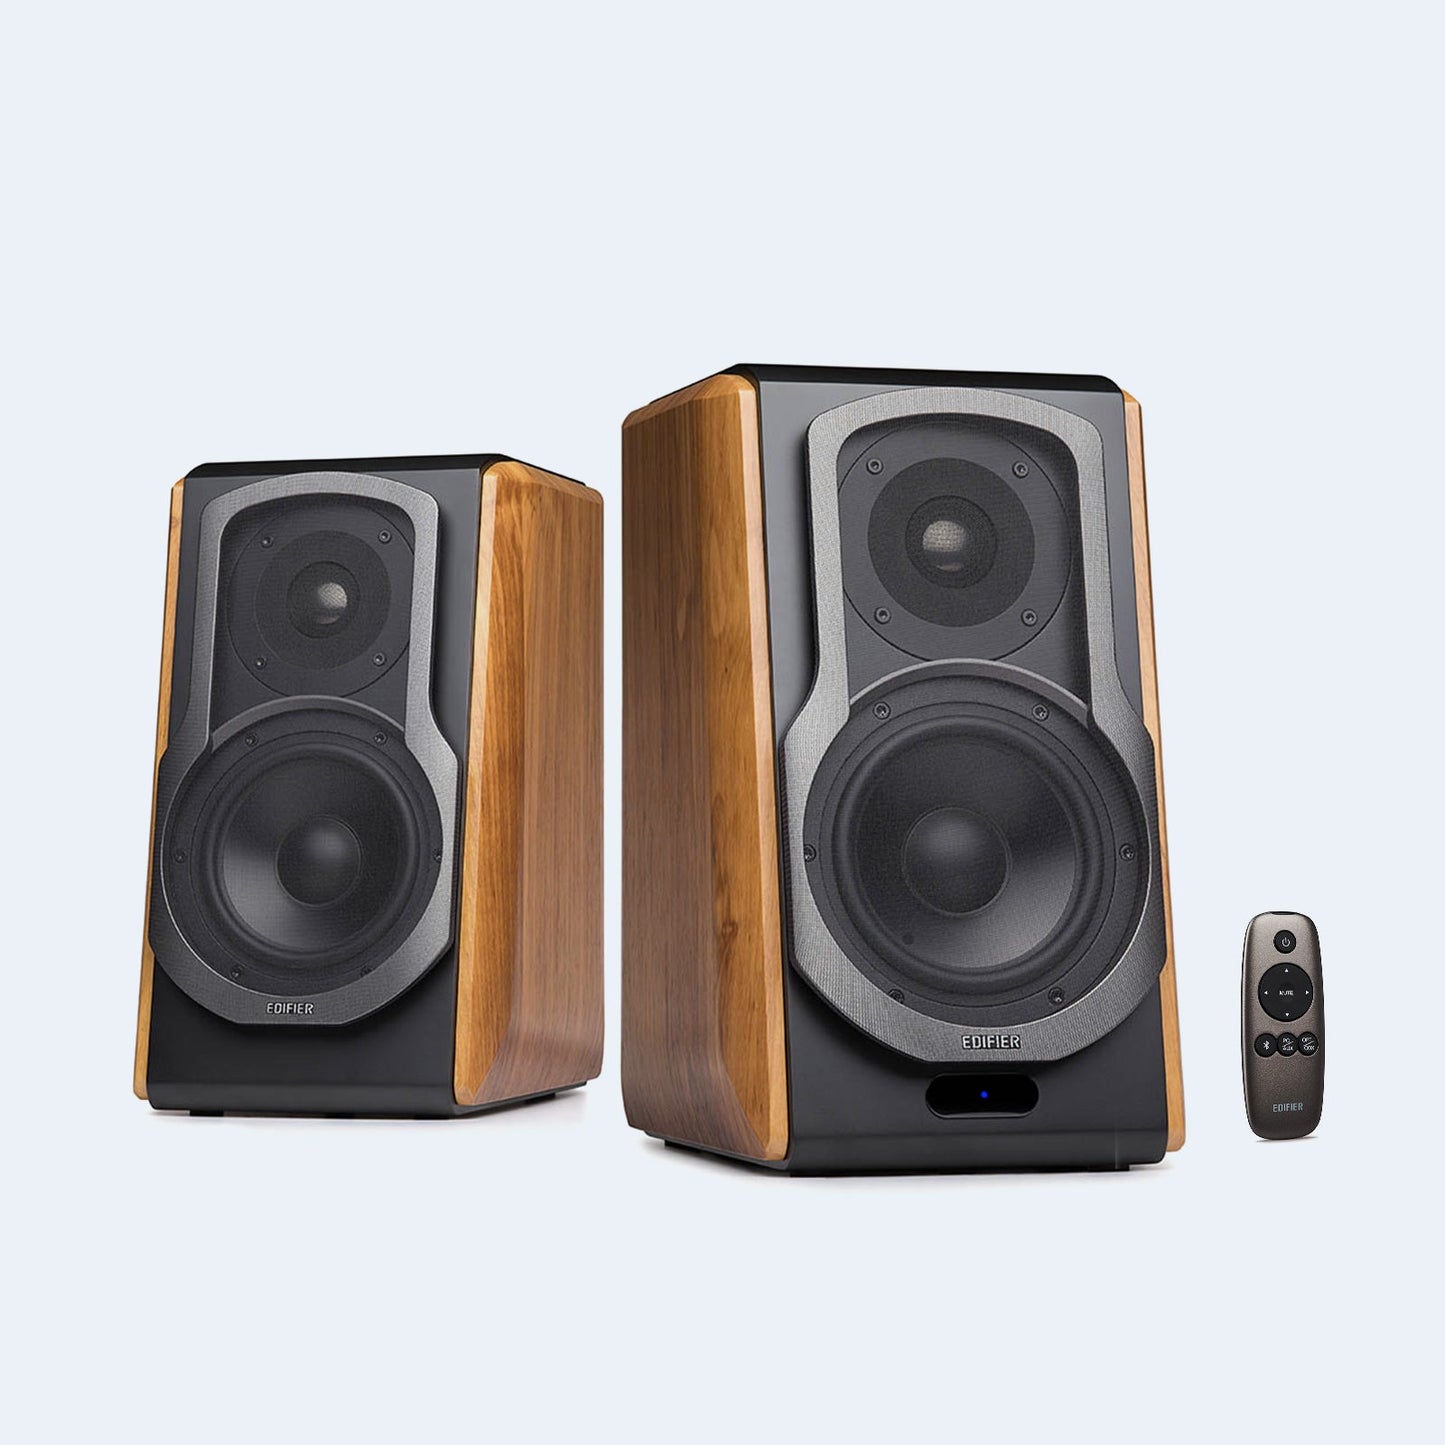 Music Hall 'Classic' Belt Drive Turntable + Edifier S1000DB MKII 2.0 Active Bookshelf Speakers Package Deal